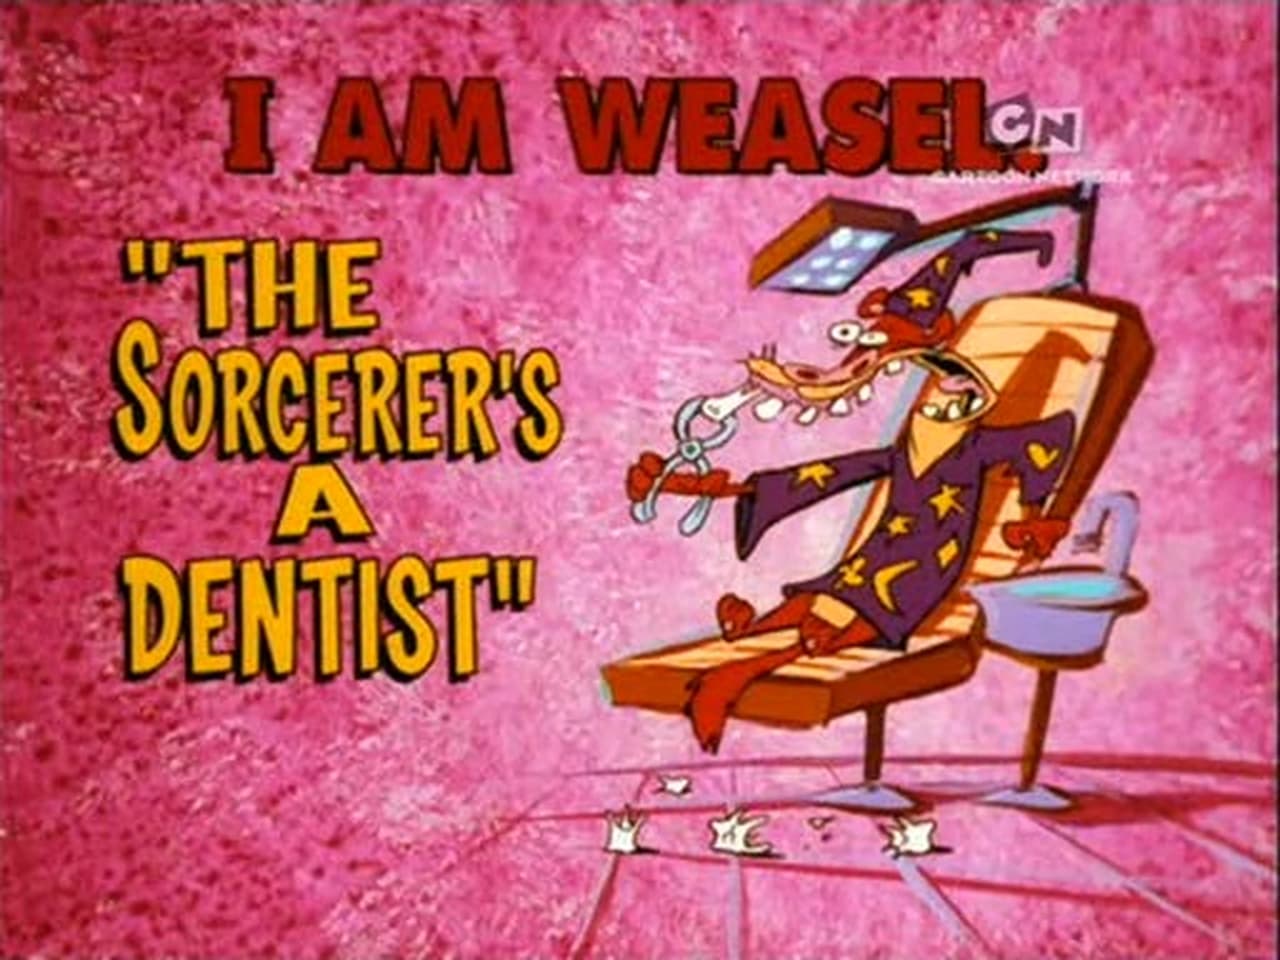 The Sorcerers a Dentist